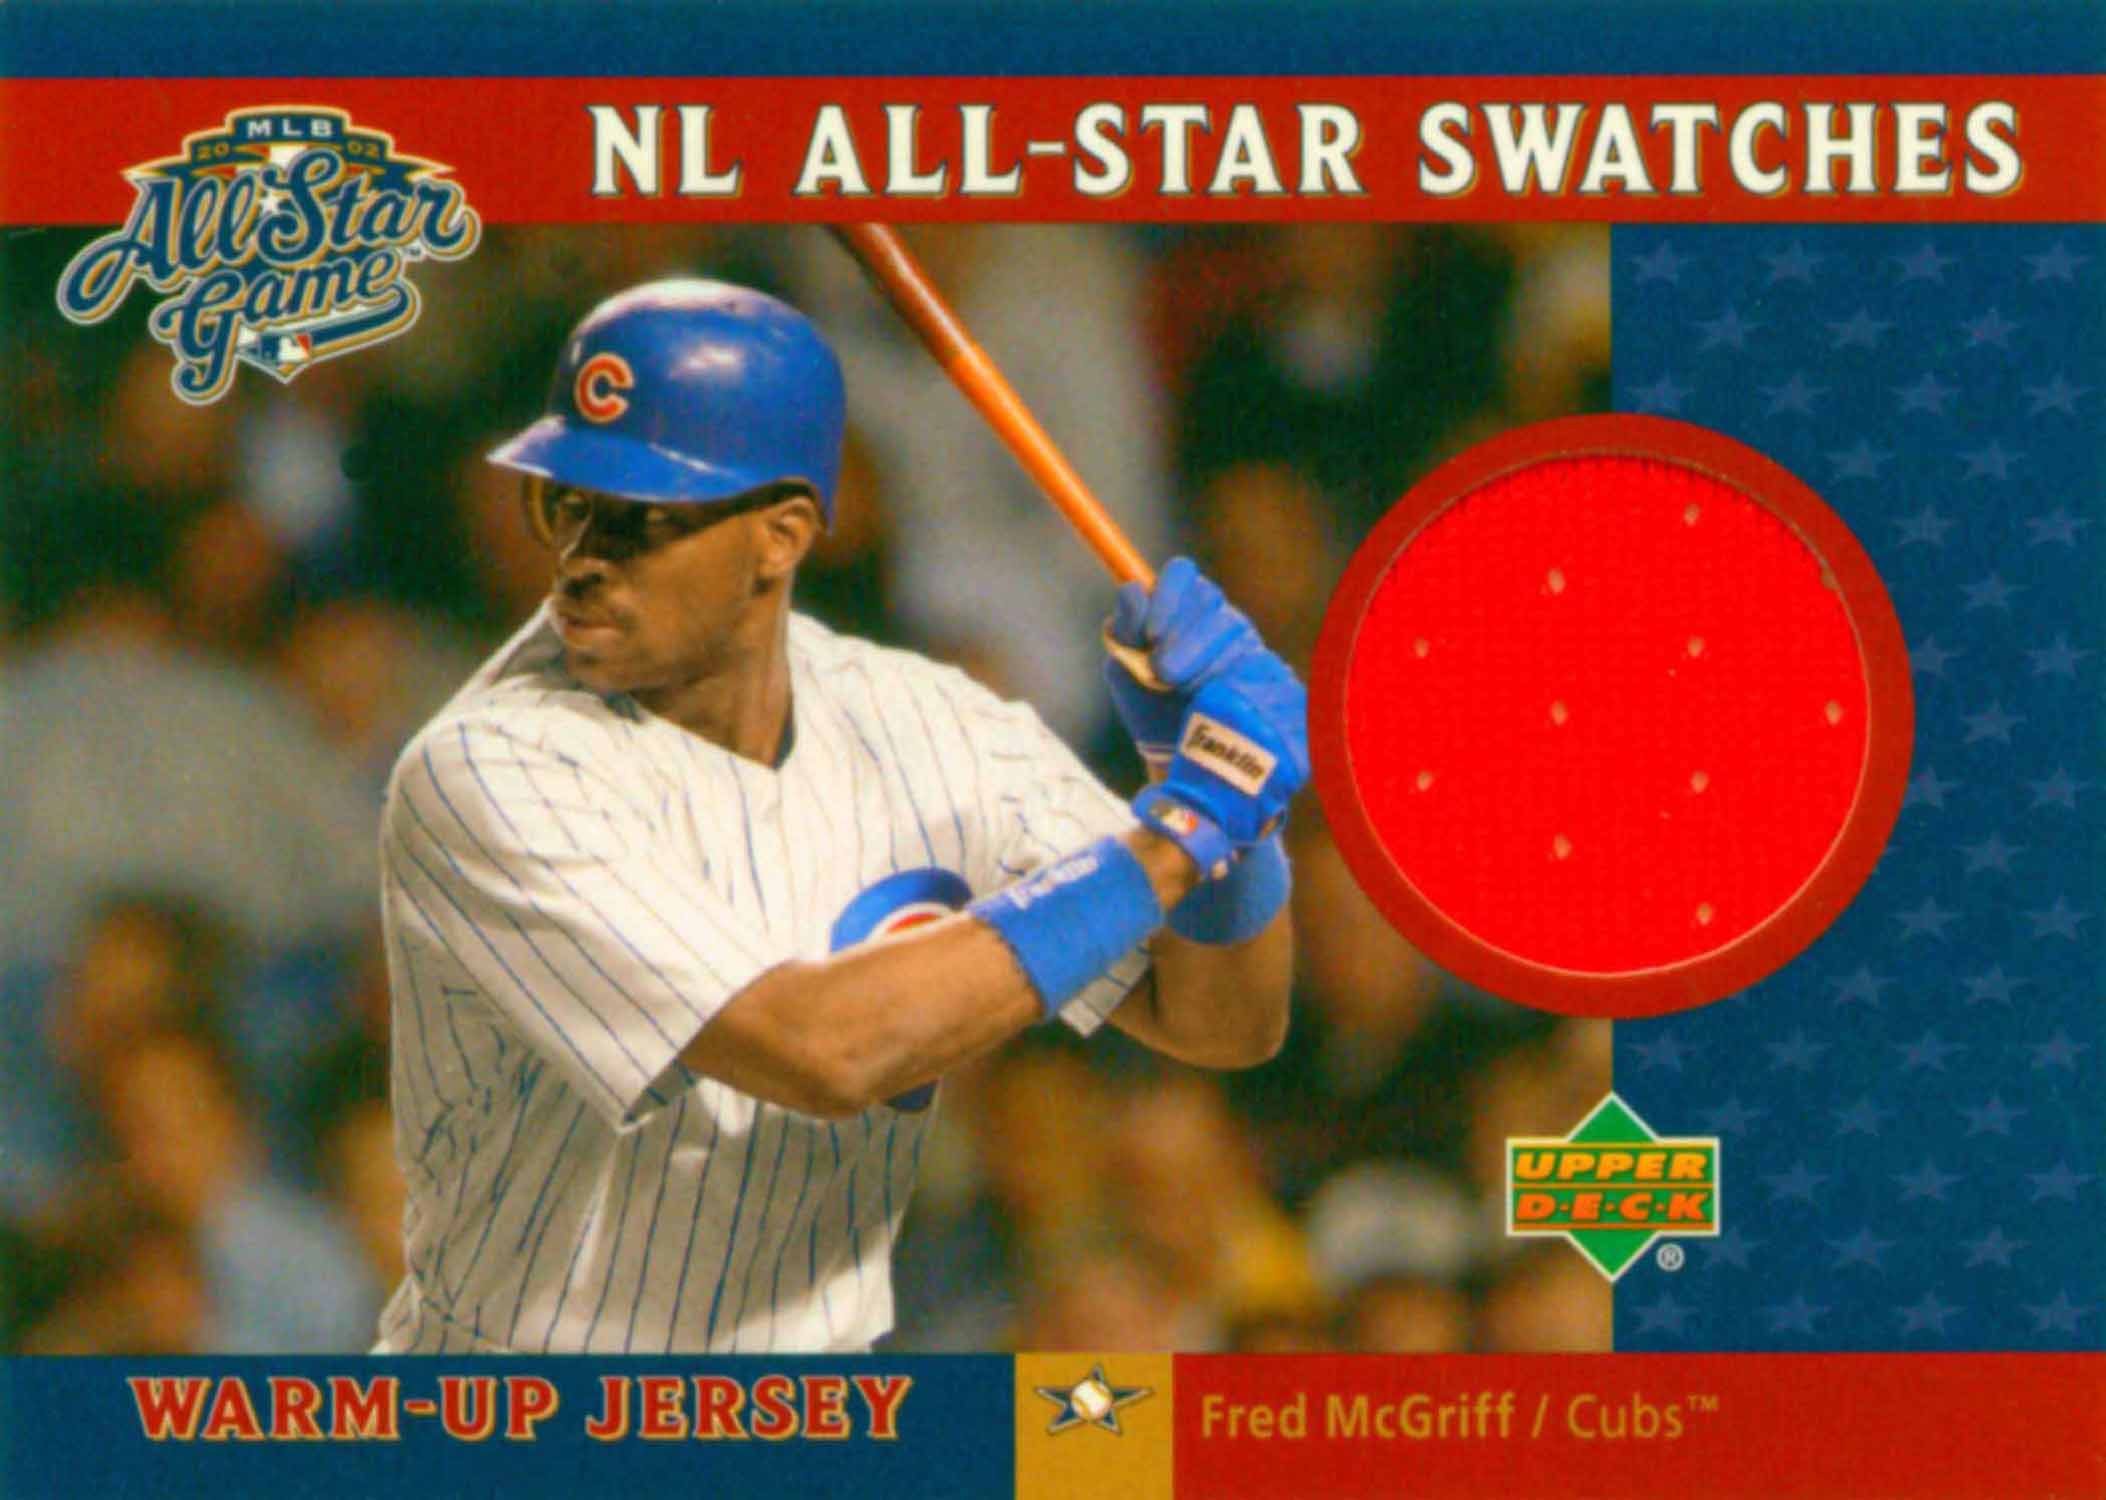 2003 Upper Deck NL All-Star Swatches